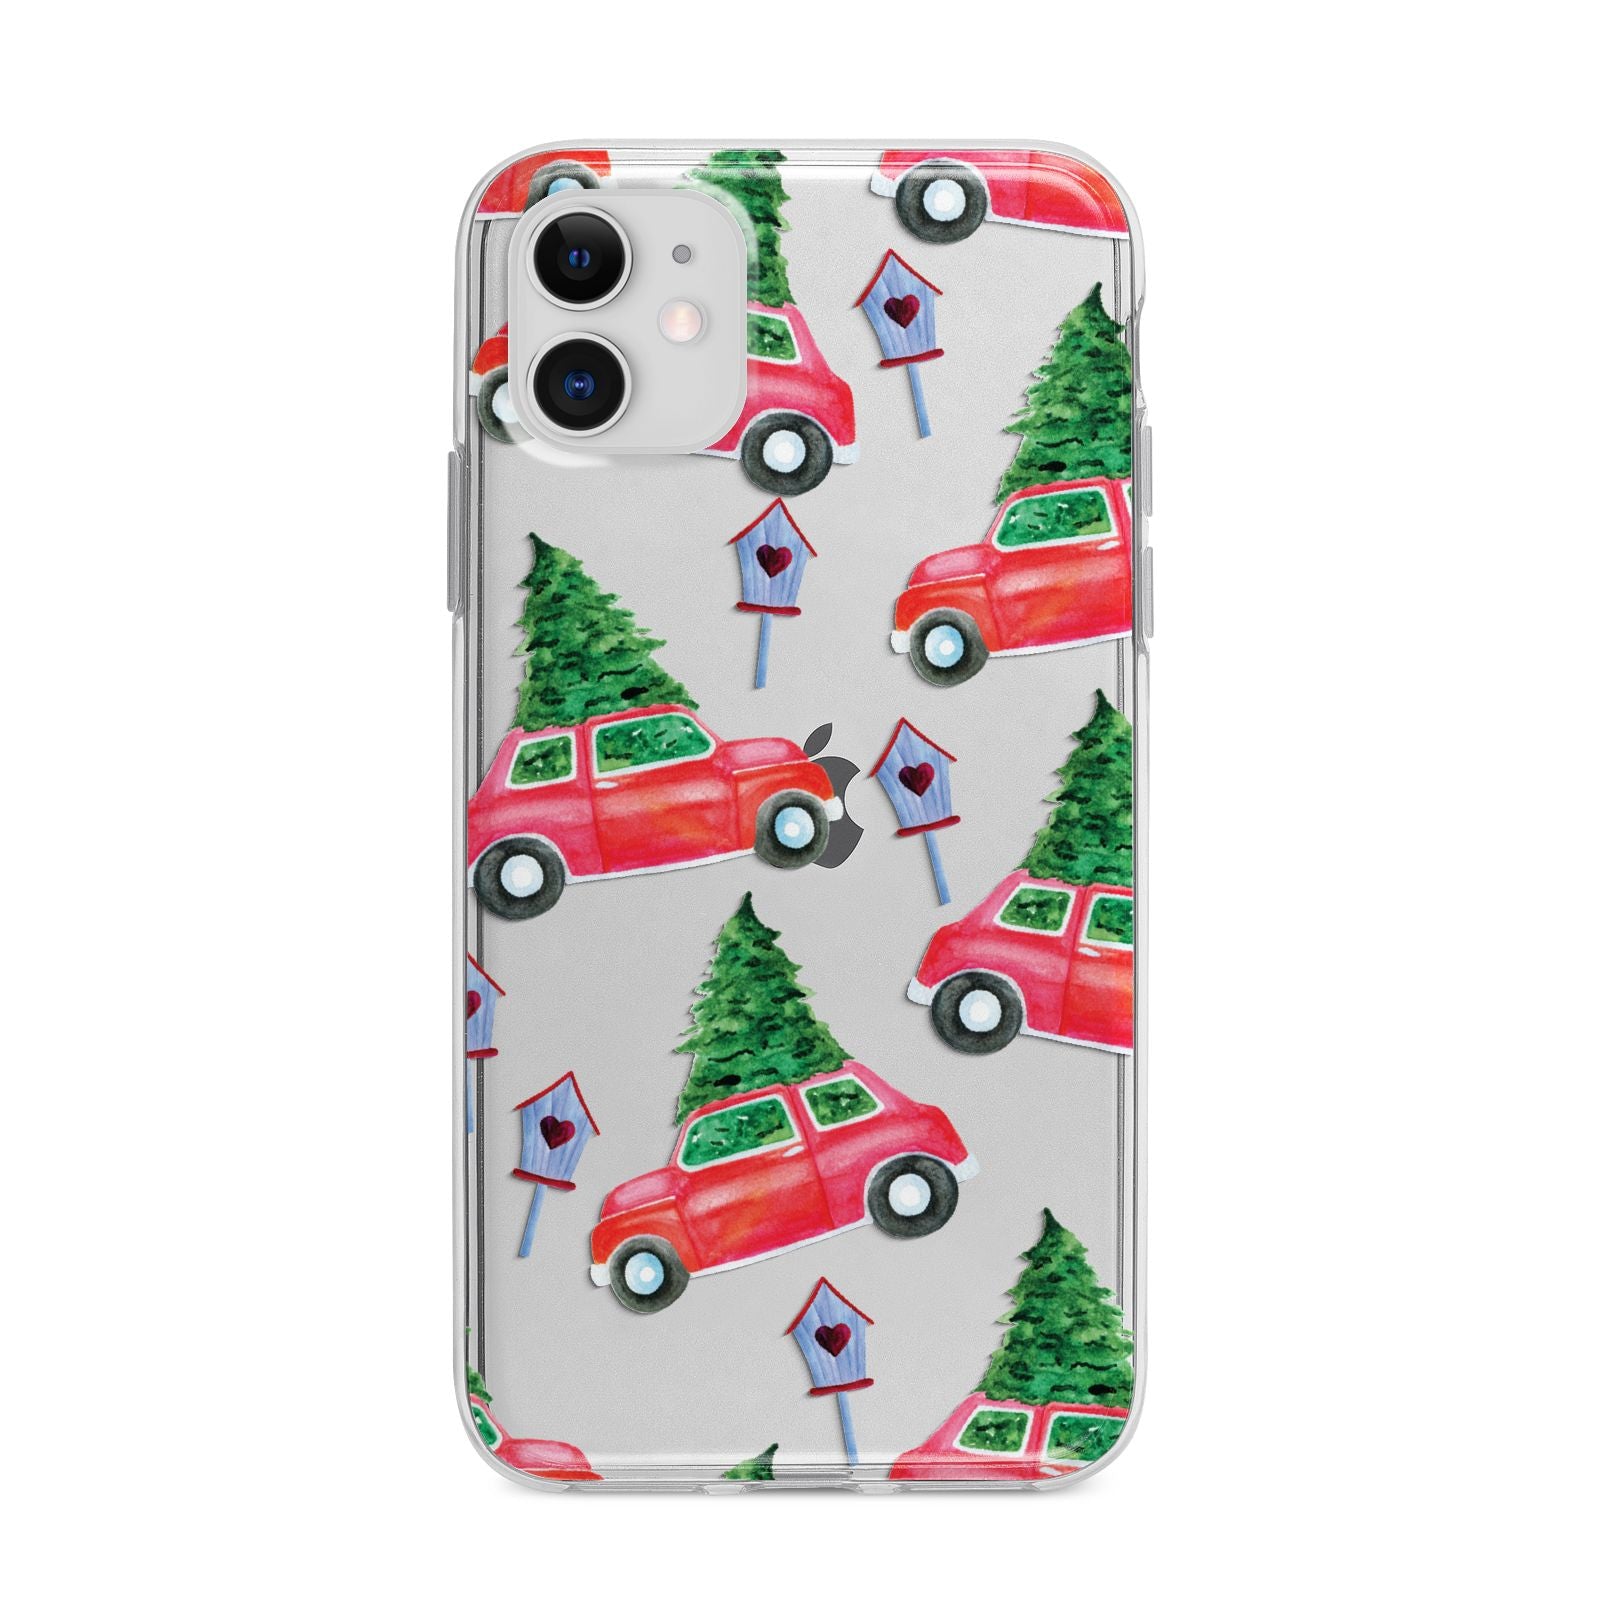 Driving home for Christmas Apple iPhone 11 in White with Bumper Case